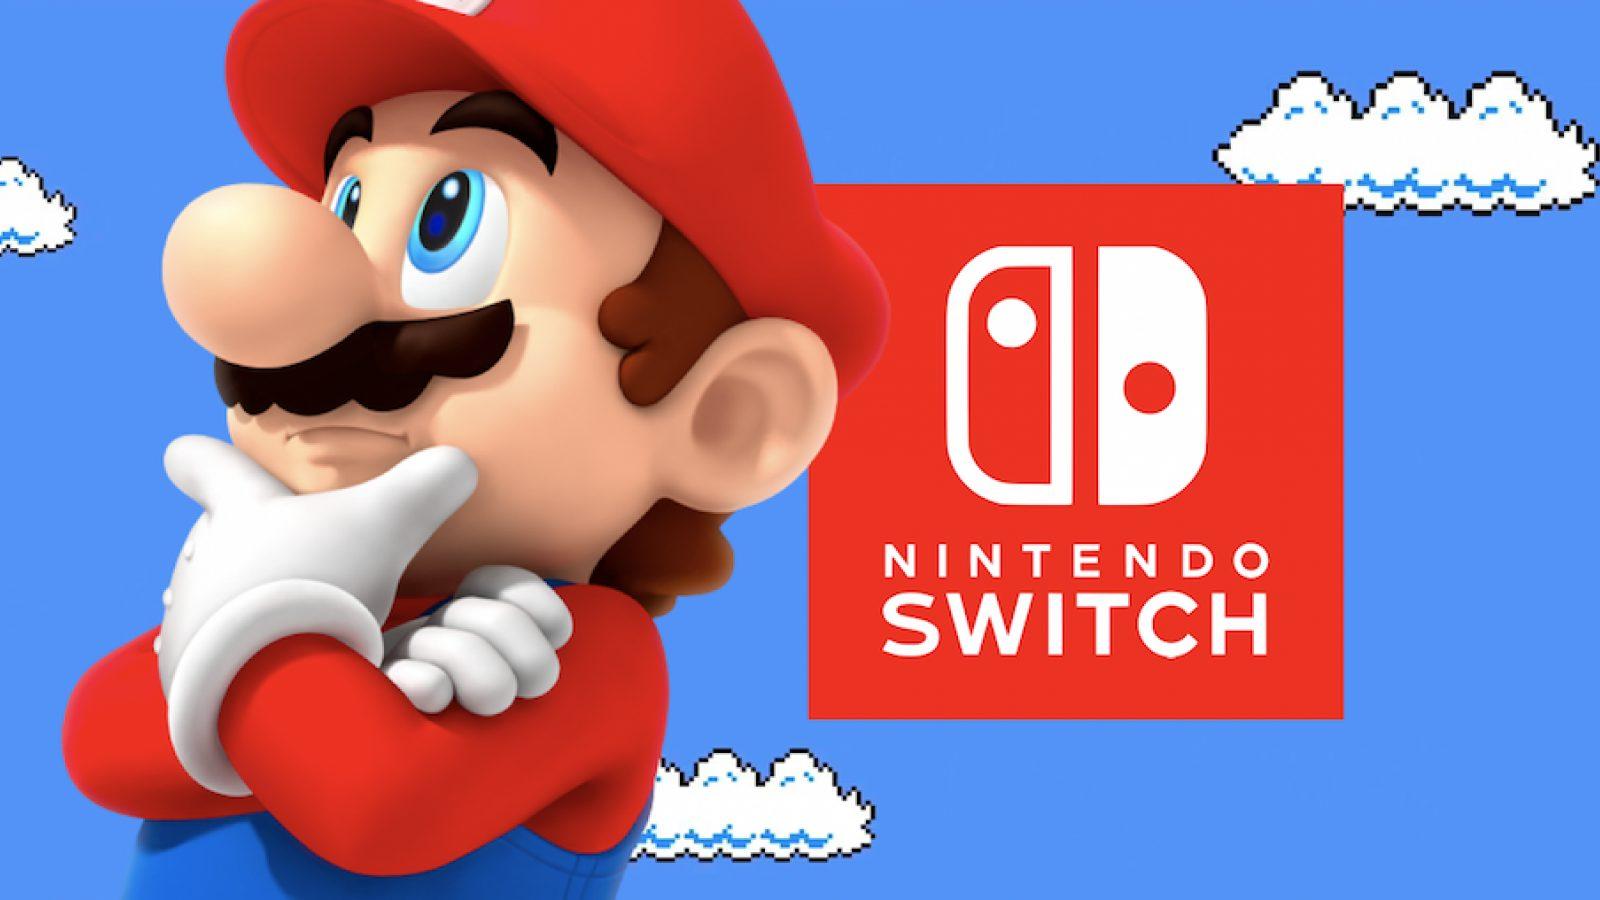 Nintendo Switch 2: Rumors and everything we know about the next